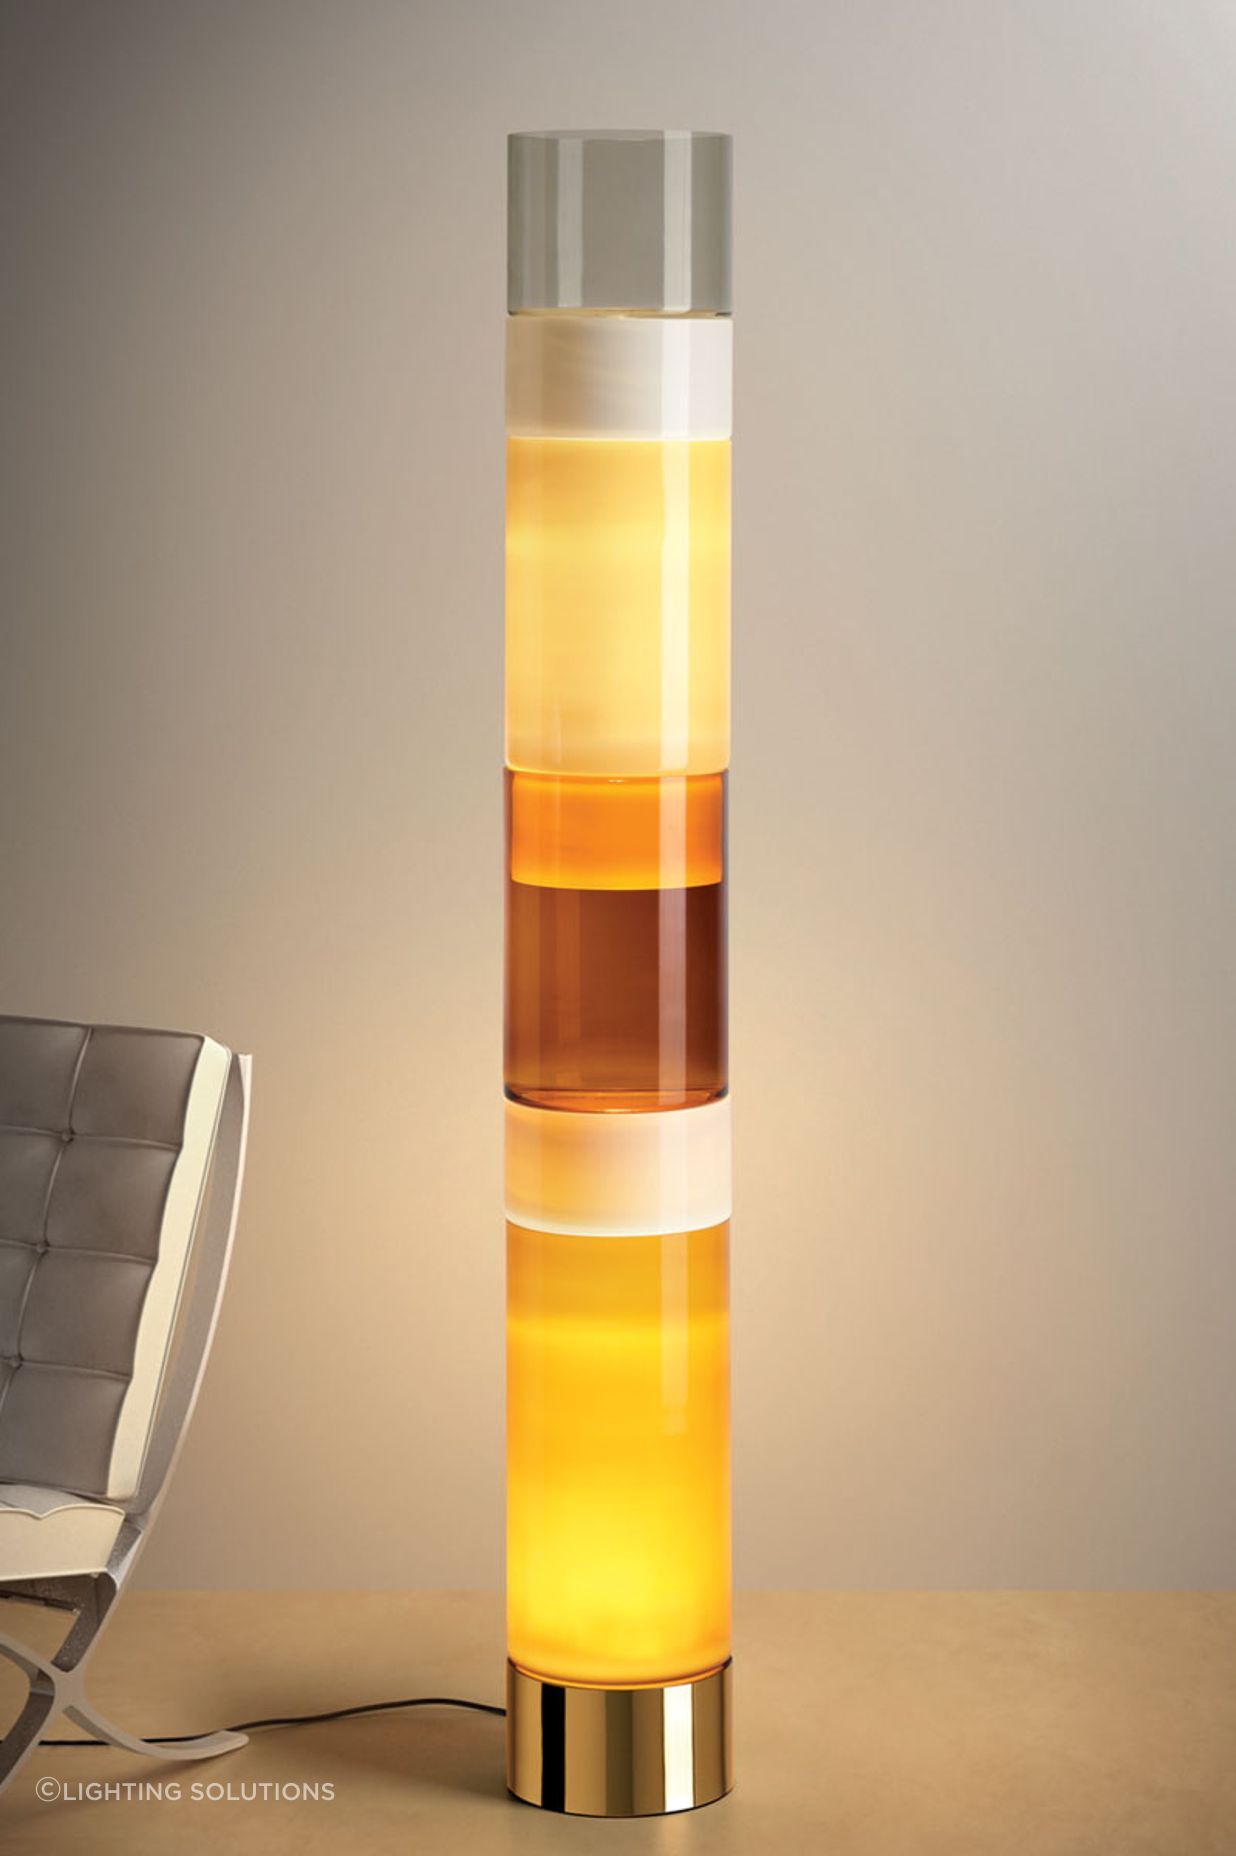 The Stacking Floor Lamp by Leucos featuring handblown glass cylinders is a great decorative option